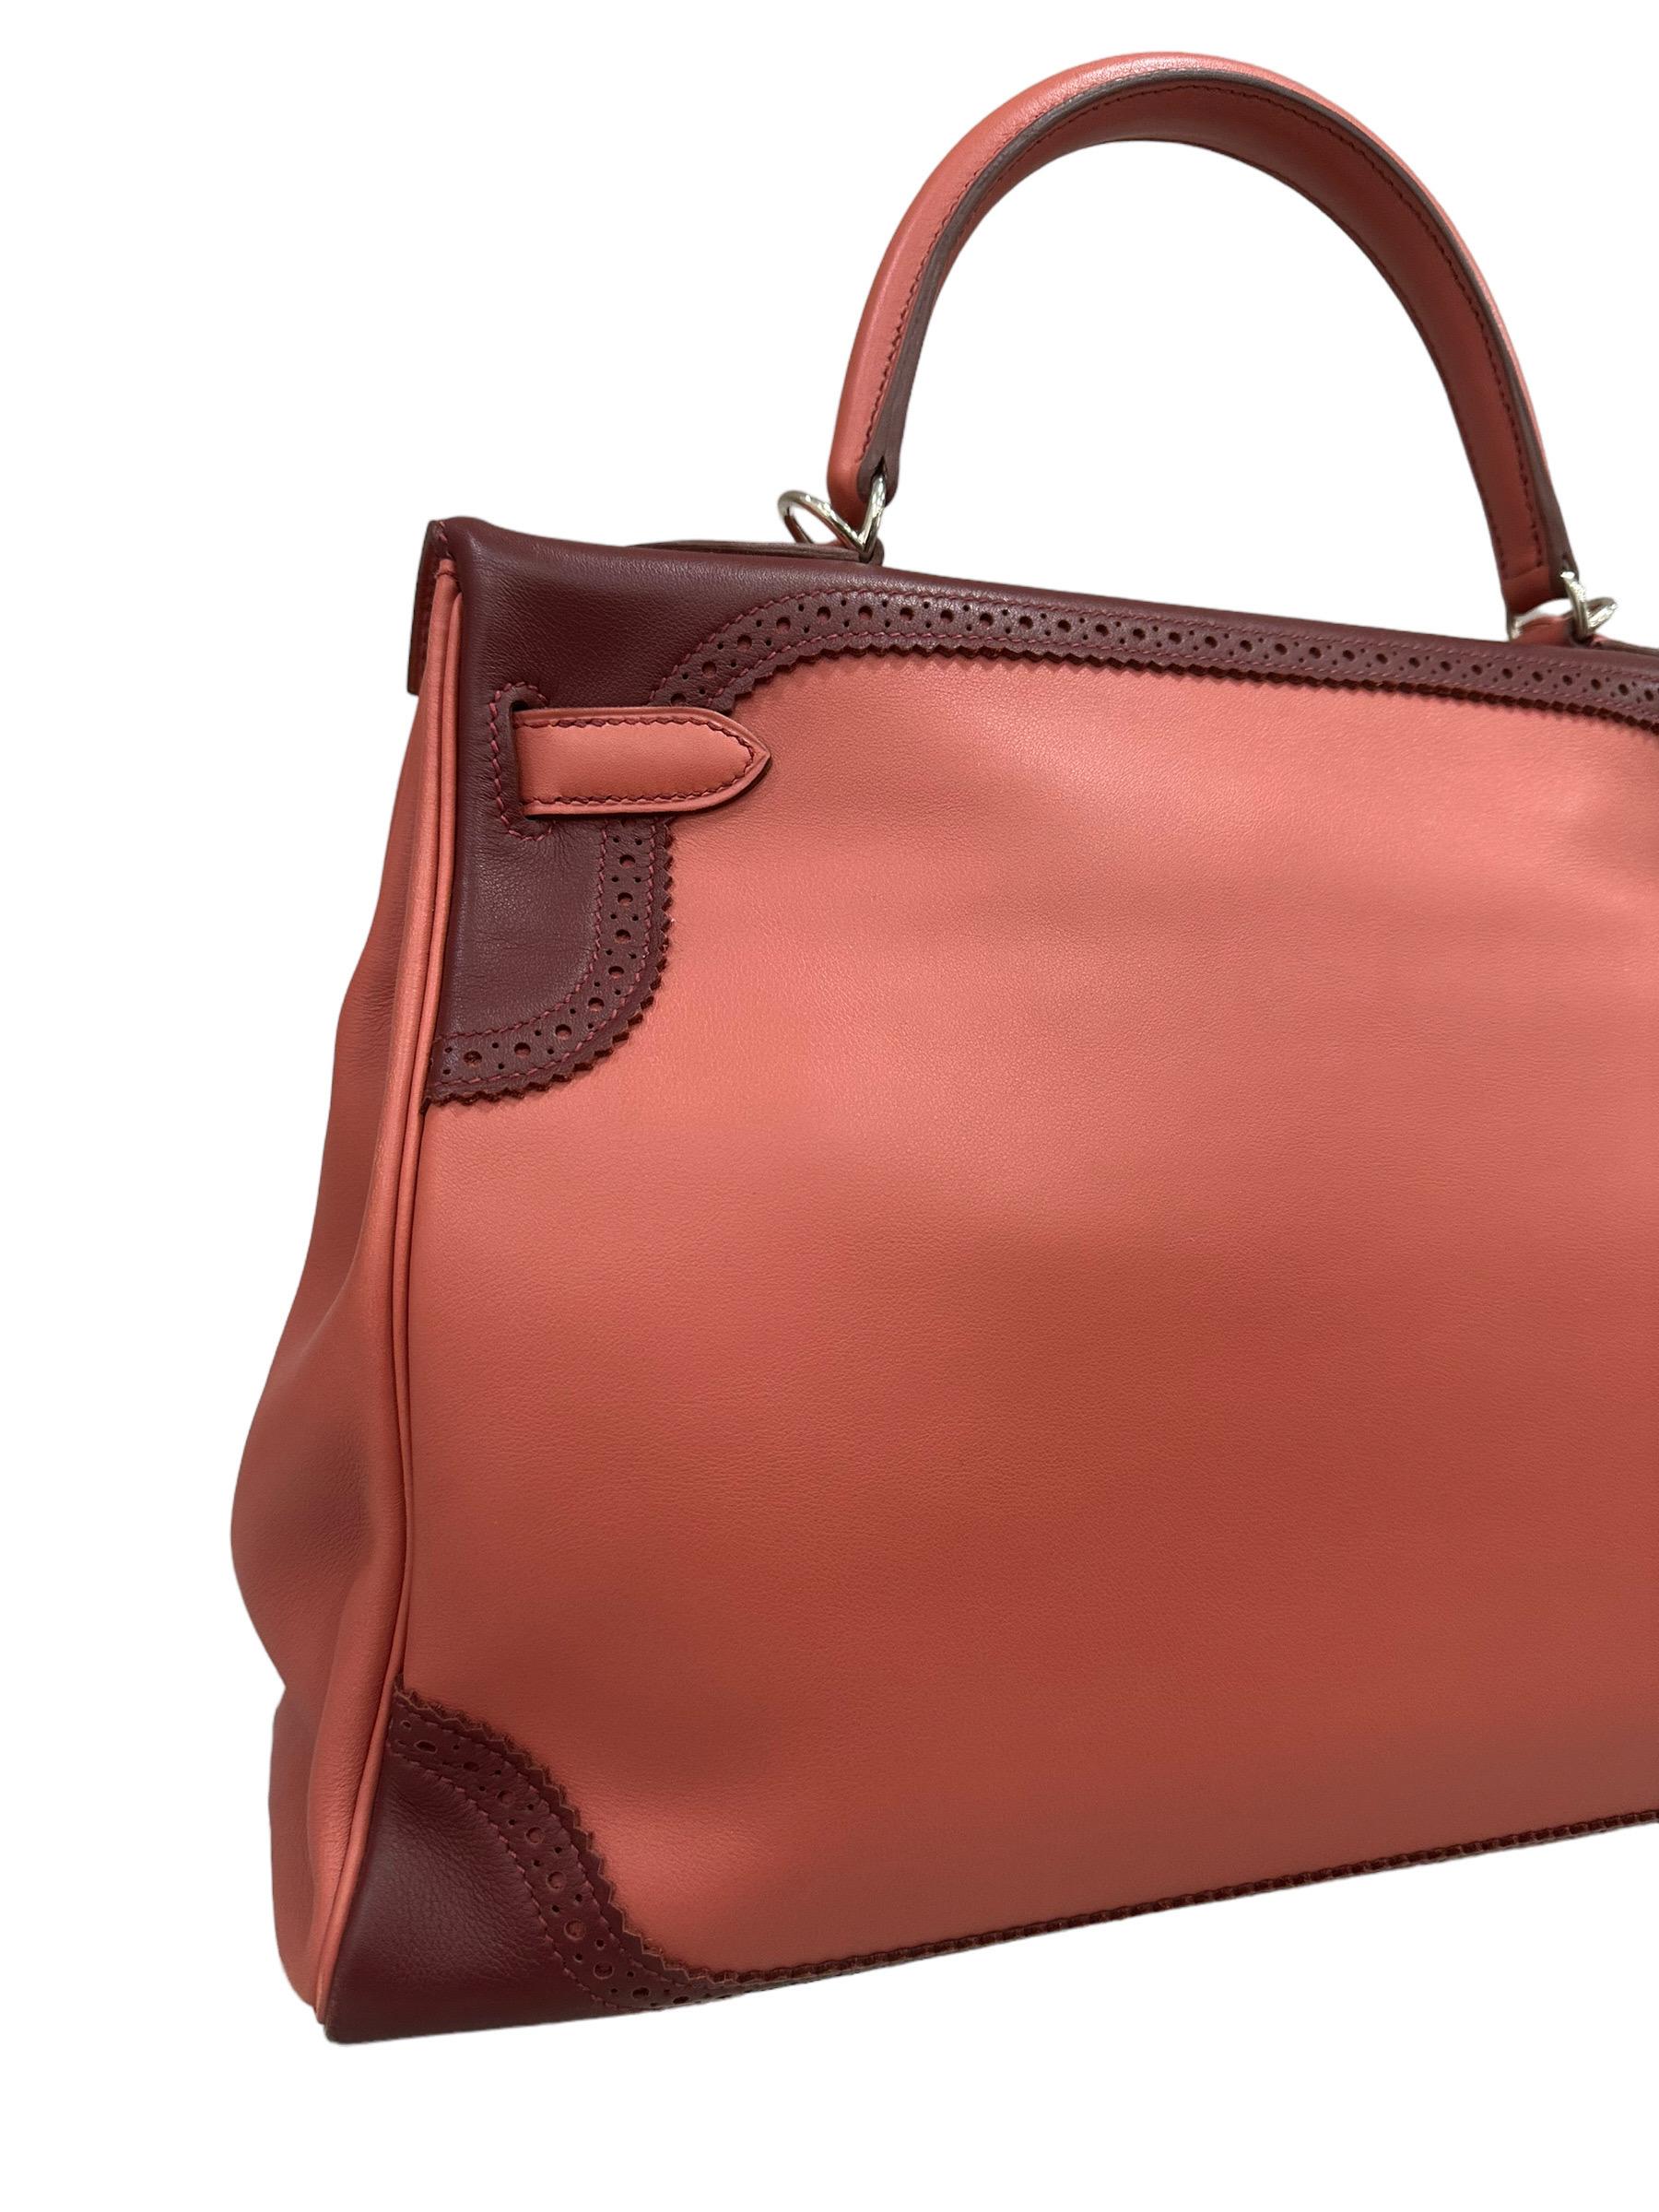 2012 Hermès Kelly 35 Ghillies Evercalf Rose Texas/Rouge H For Sale 4